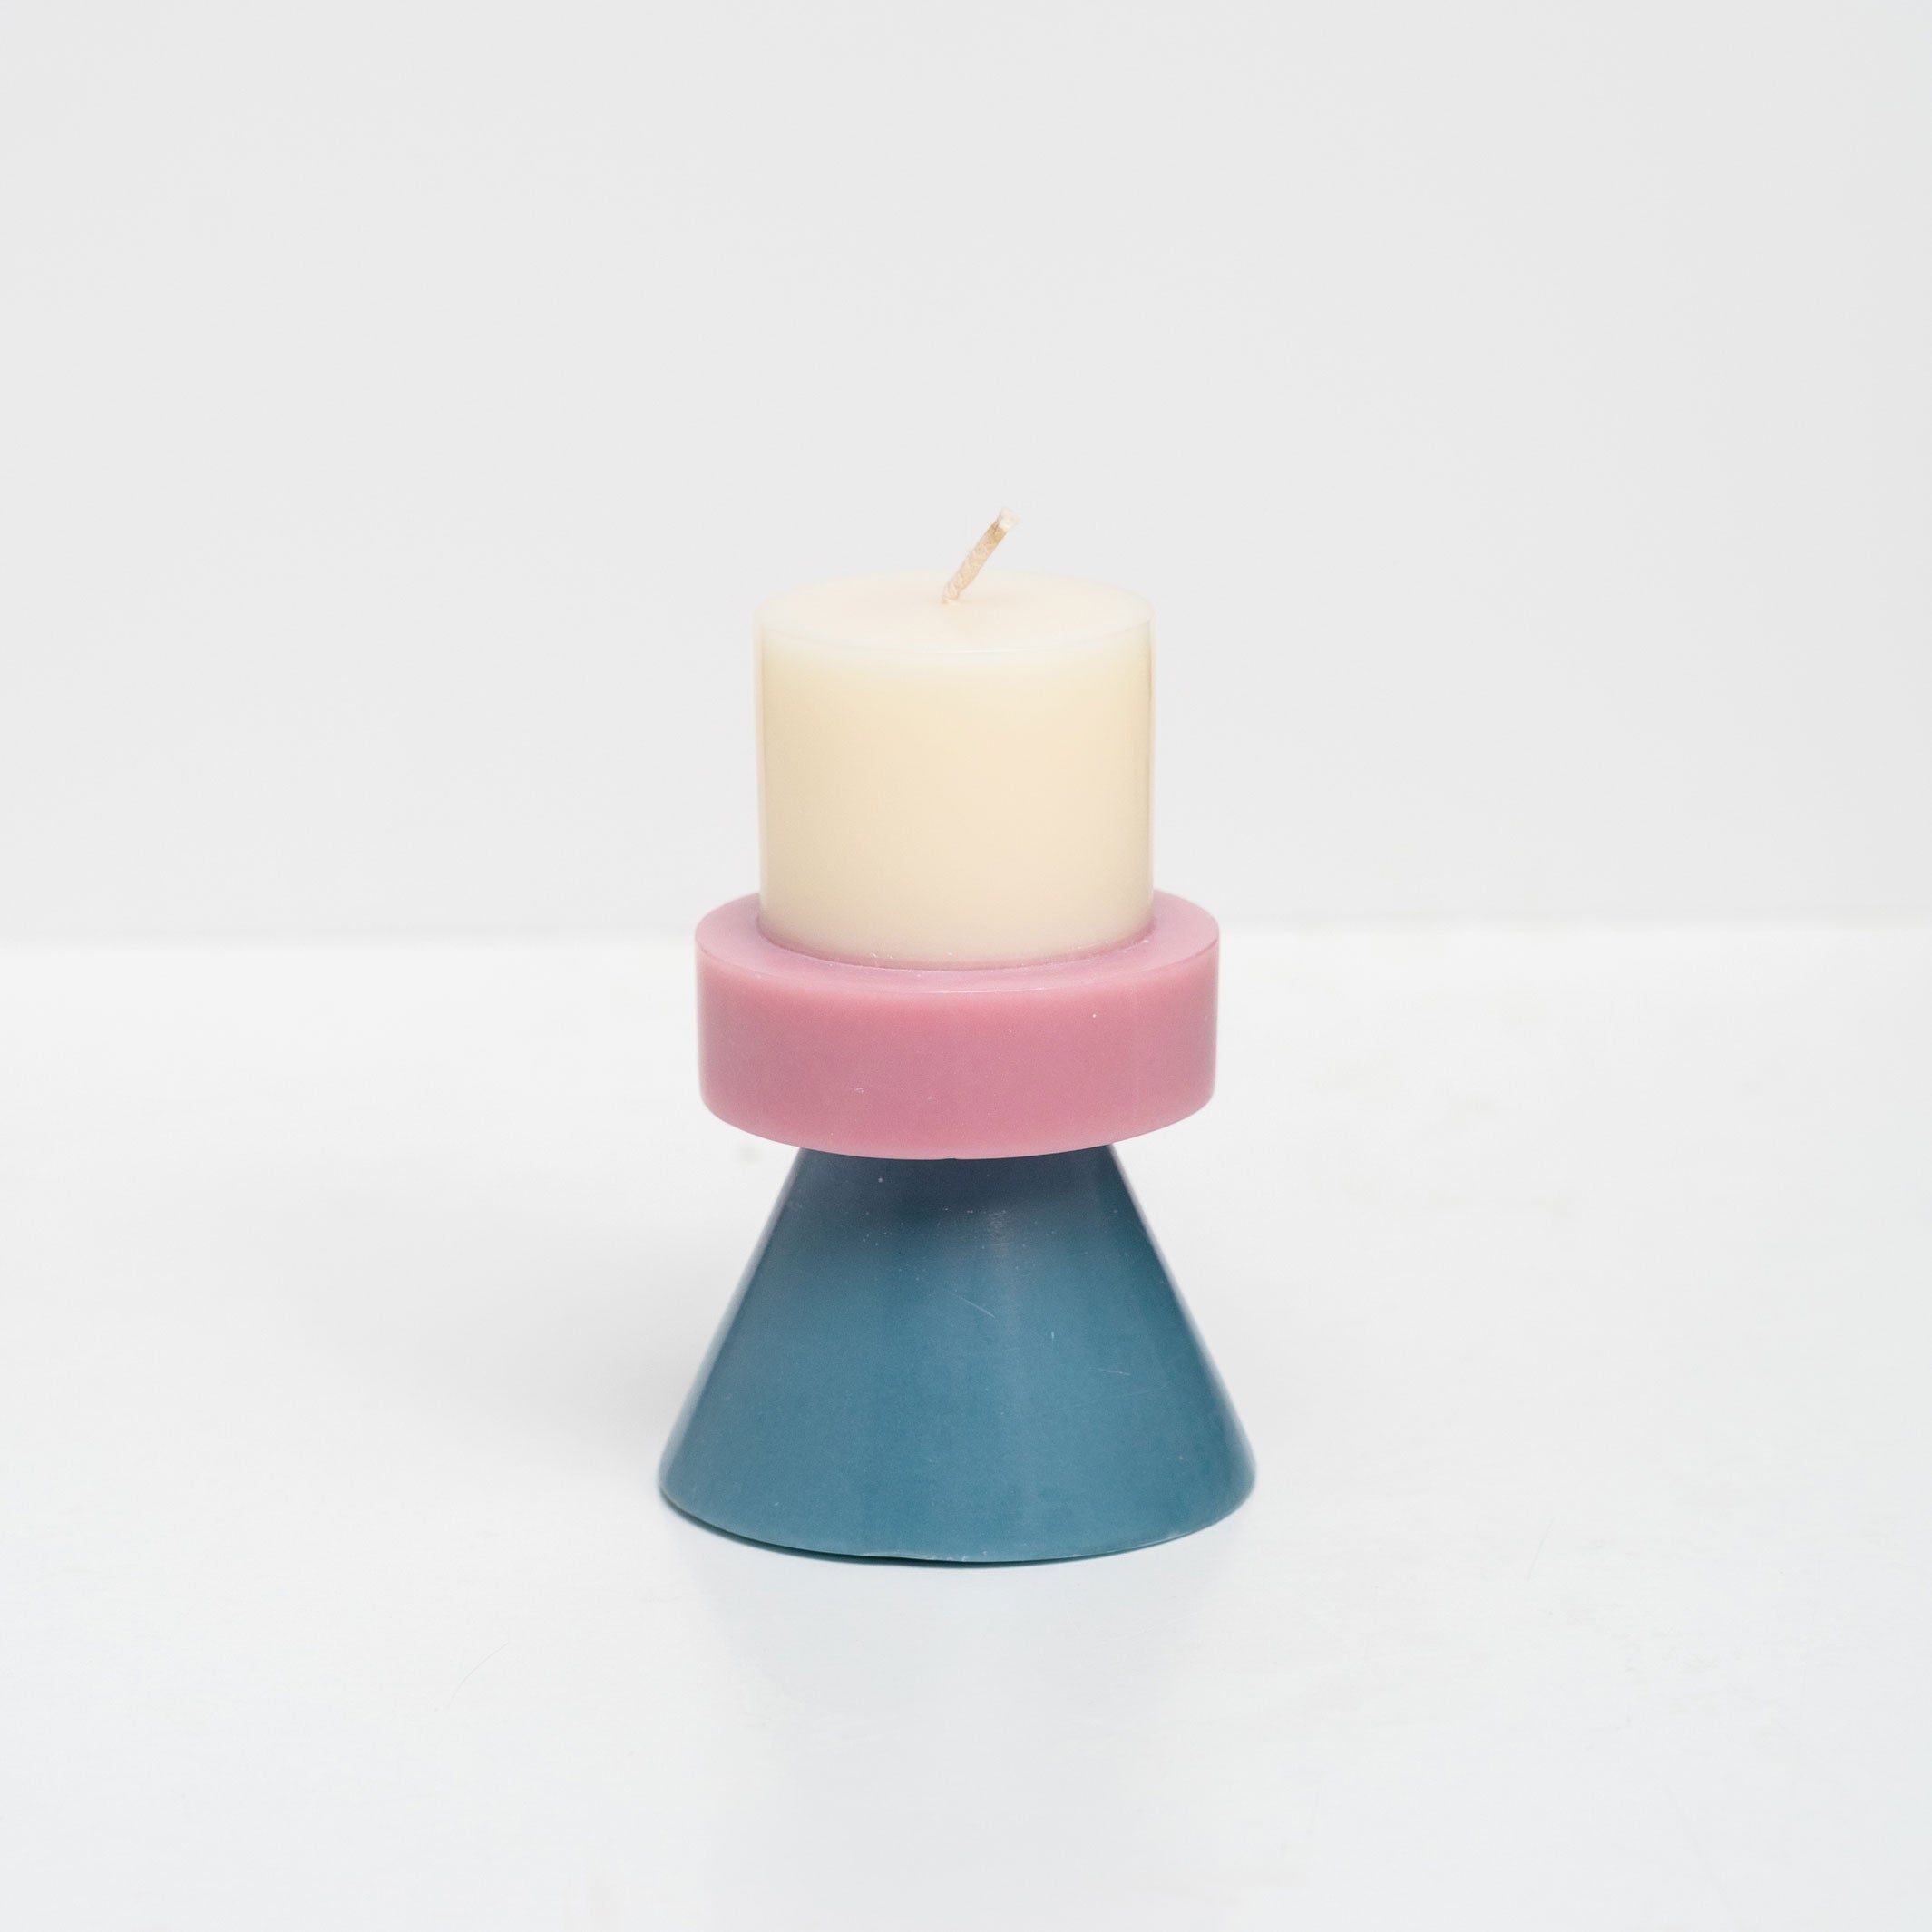 STACK CANDLE MINI | KERZE in Farben ivory-lavender-bluegrey | 20 Std. Brenndauer | YOD AND CO